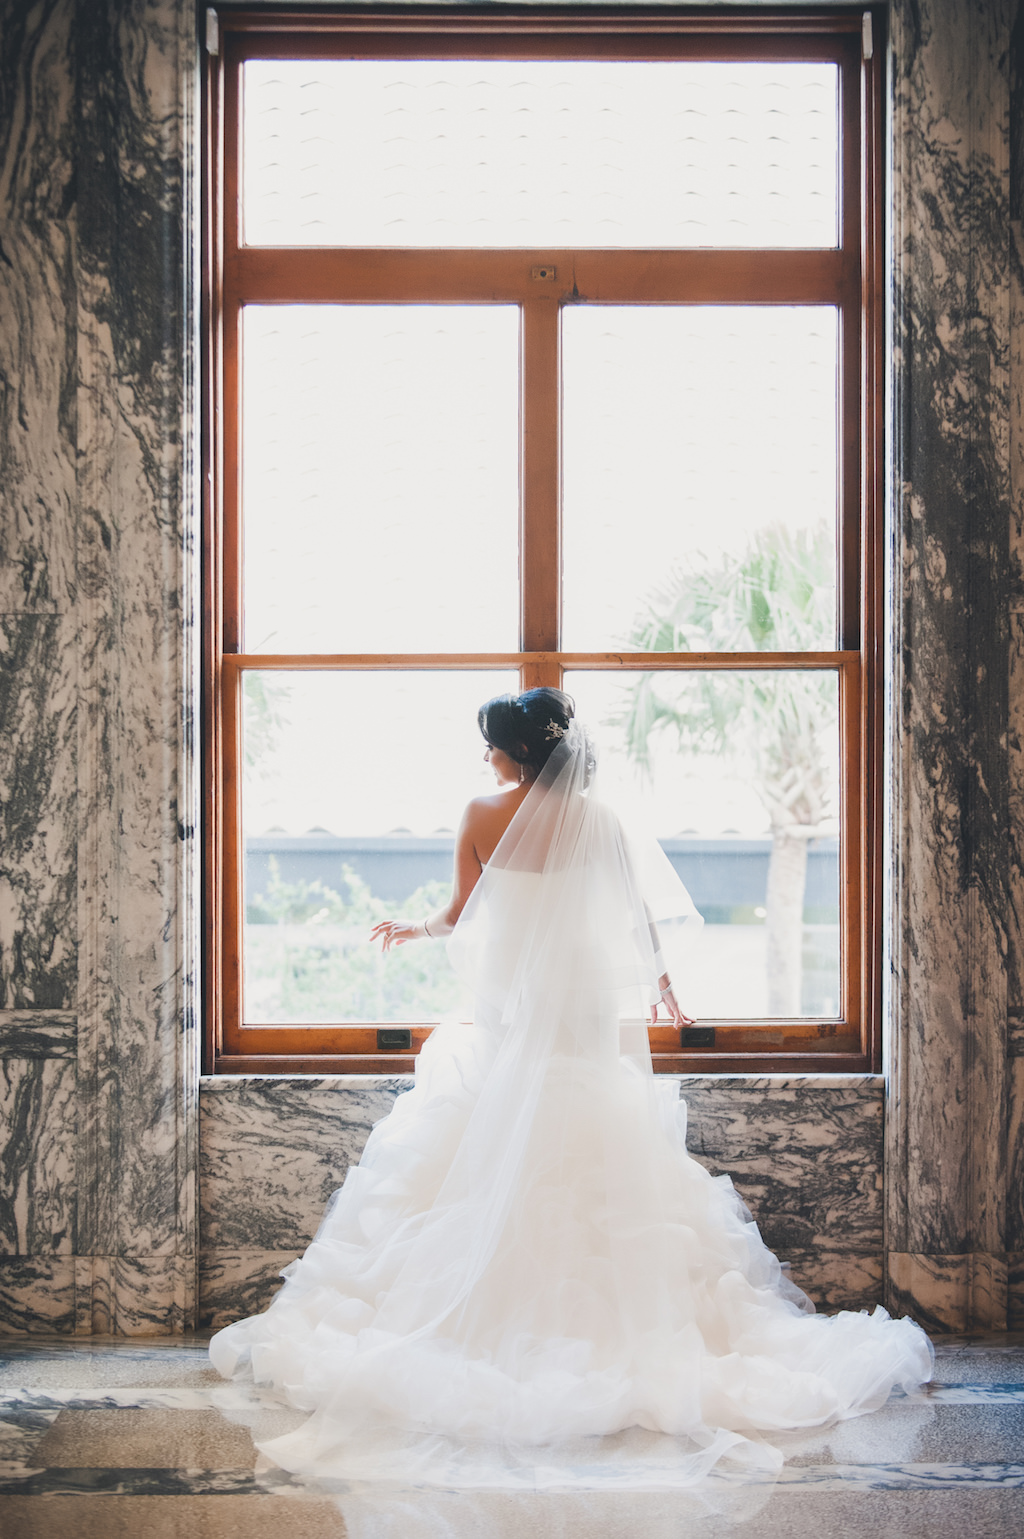 Interior Bridal Portrait in Pronovias Strapless Wedding Dress | Tampa Bay Wedding Accommodations and Bridal Suite Hotel Venue Le Meridien